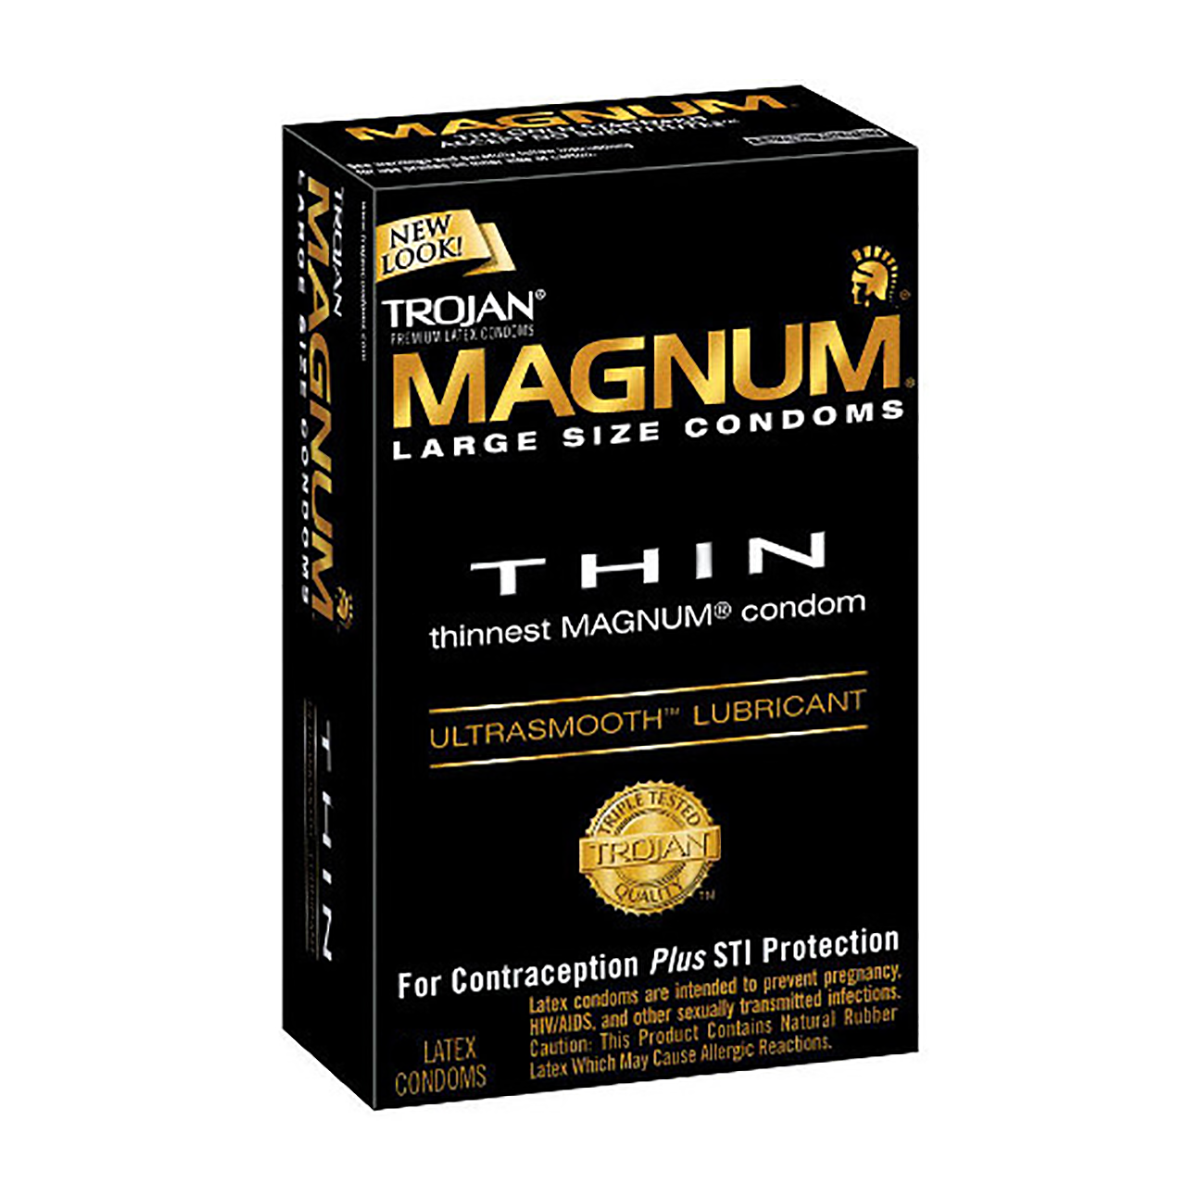 The infamous Magnum Trojan, in its thinnest version. Who says size and comfort can&rsquo;t go hand in hand?